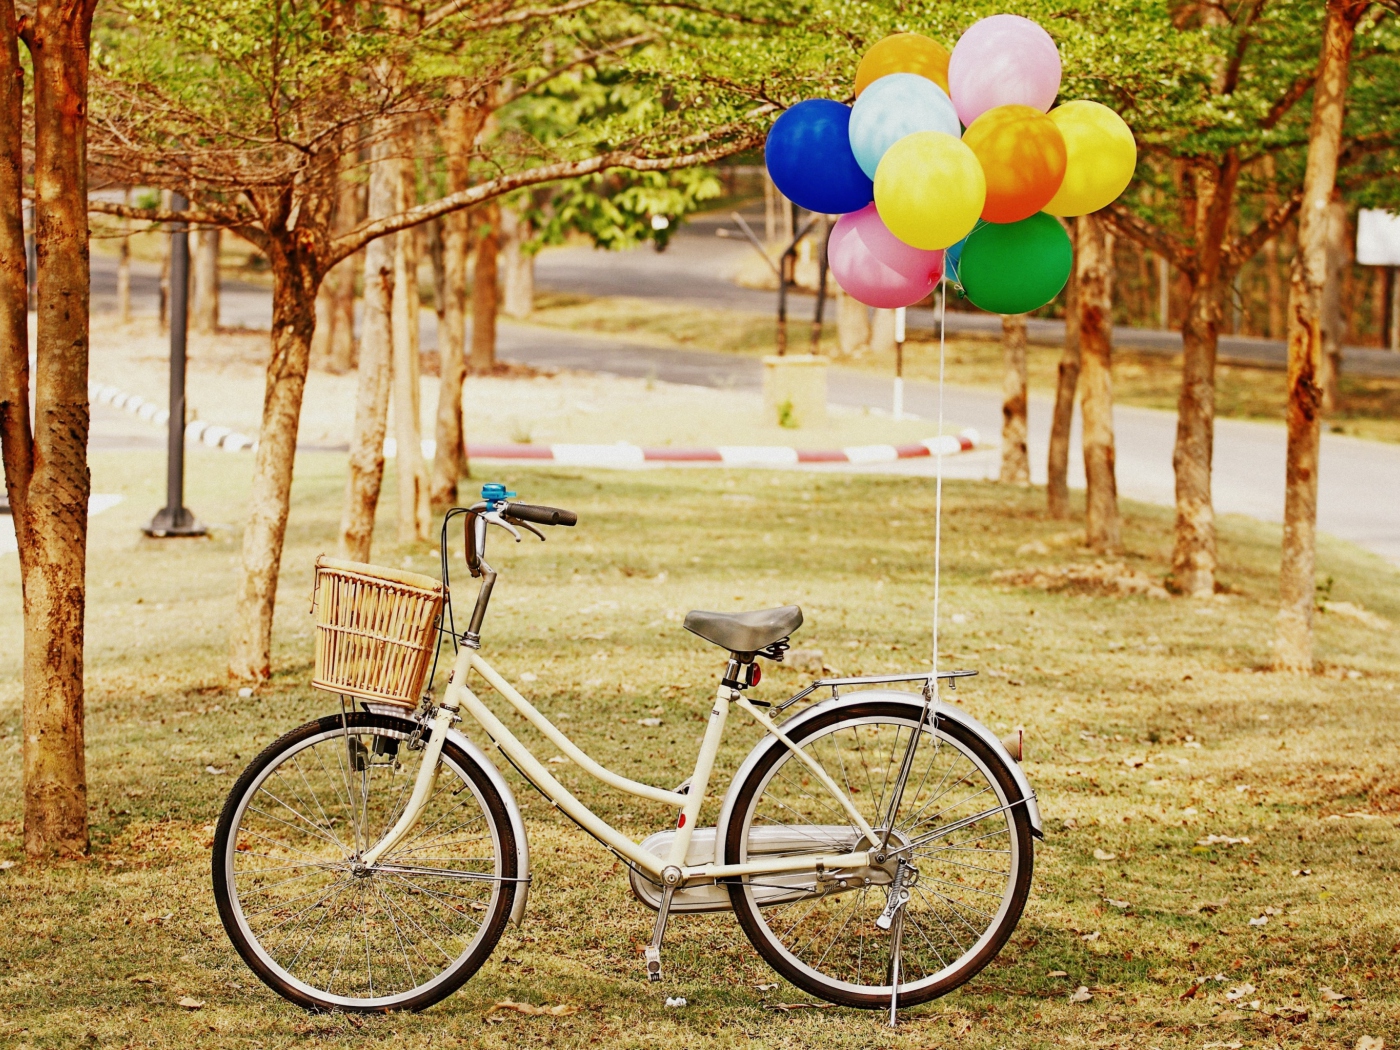 Party Bicycle wallpaper 1400x1050